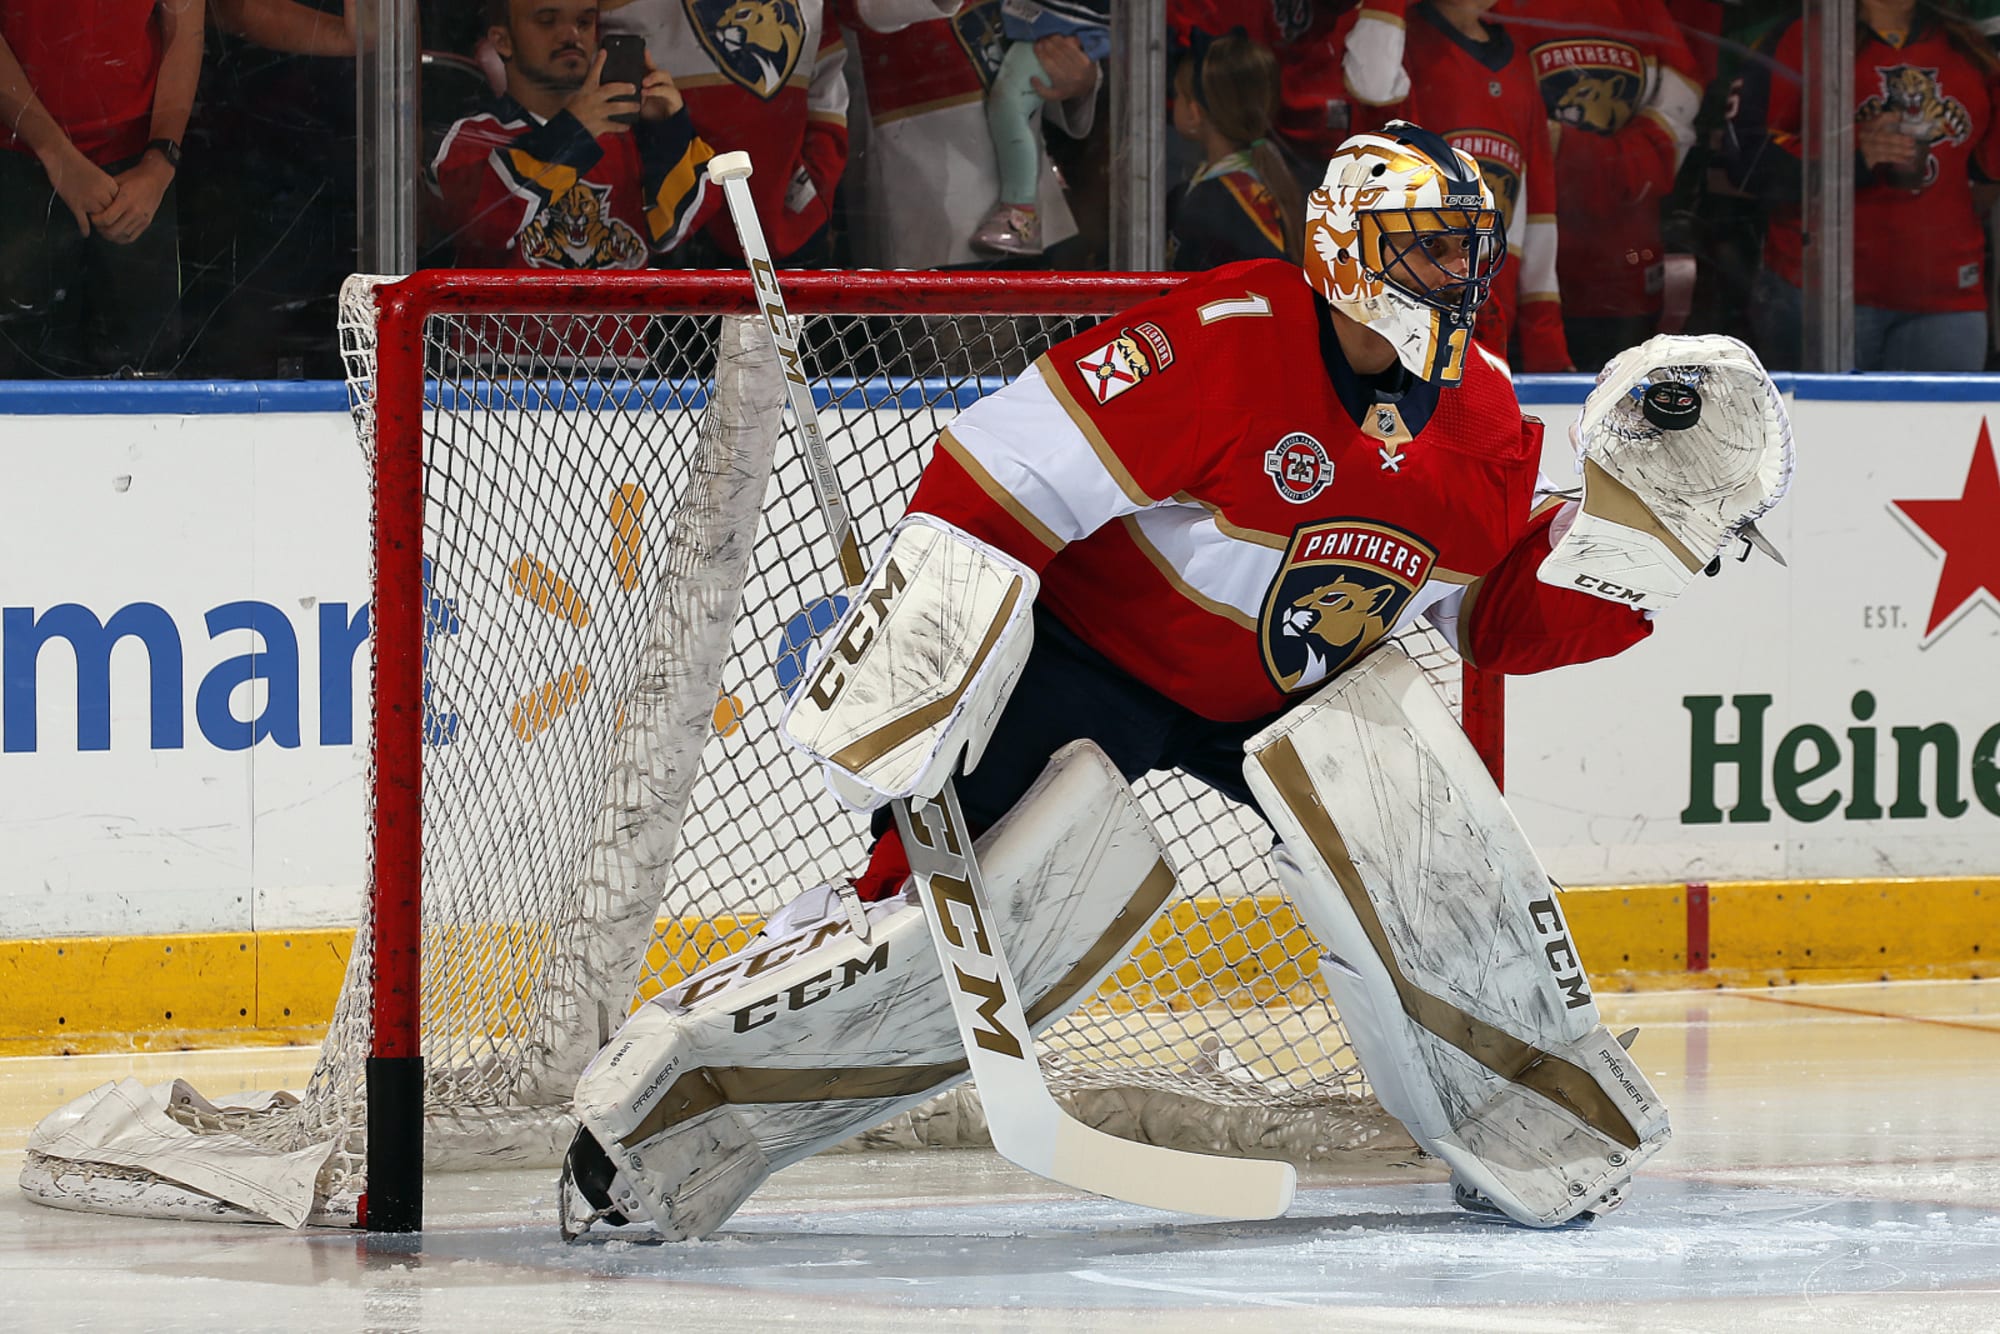 The Canucks should retire Roberto Luongo's number 1